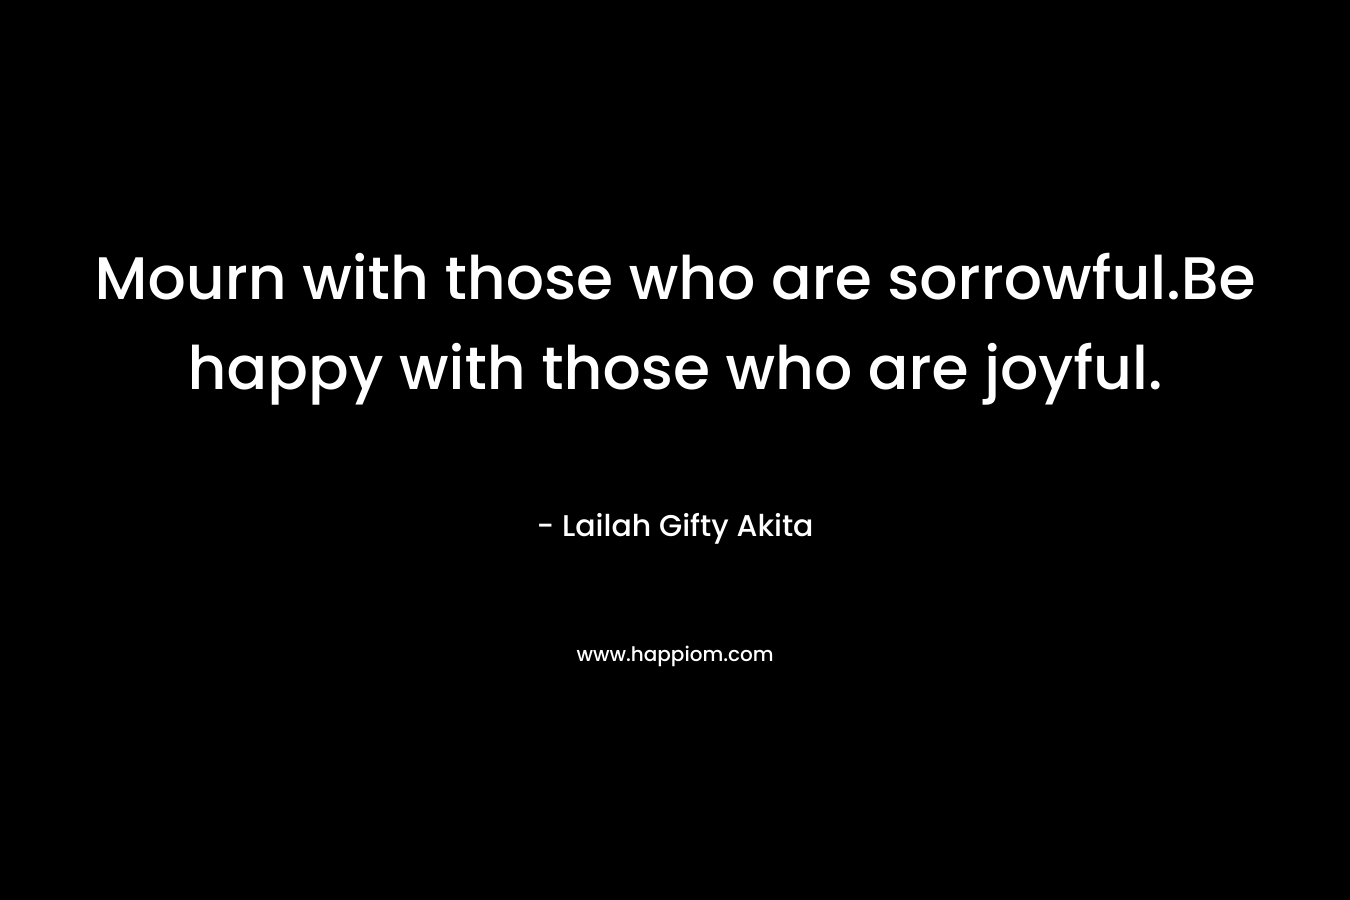 Mourn with those who are sorrowful.Be happy with those who are joyful. – Lailah Gifty Akita